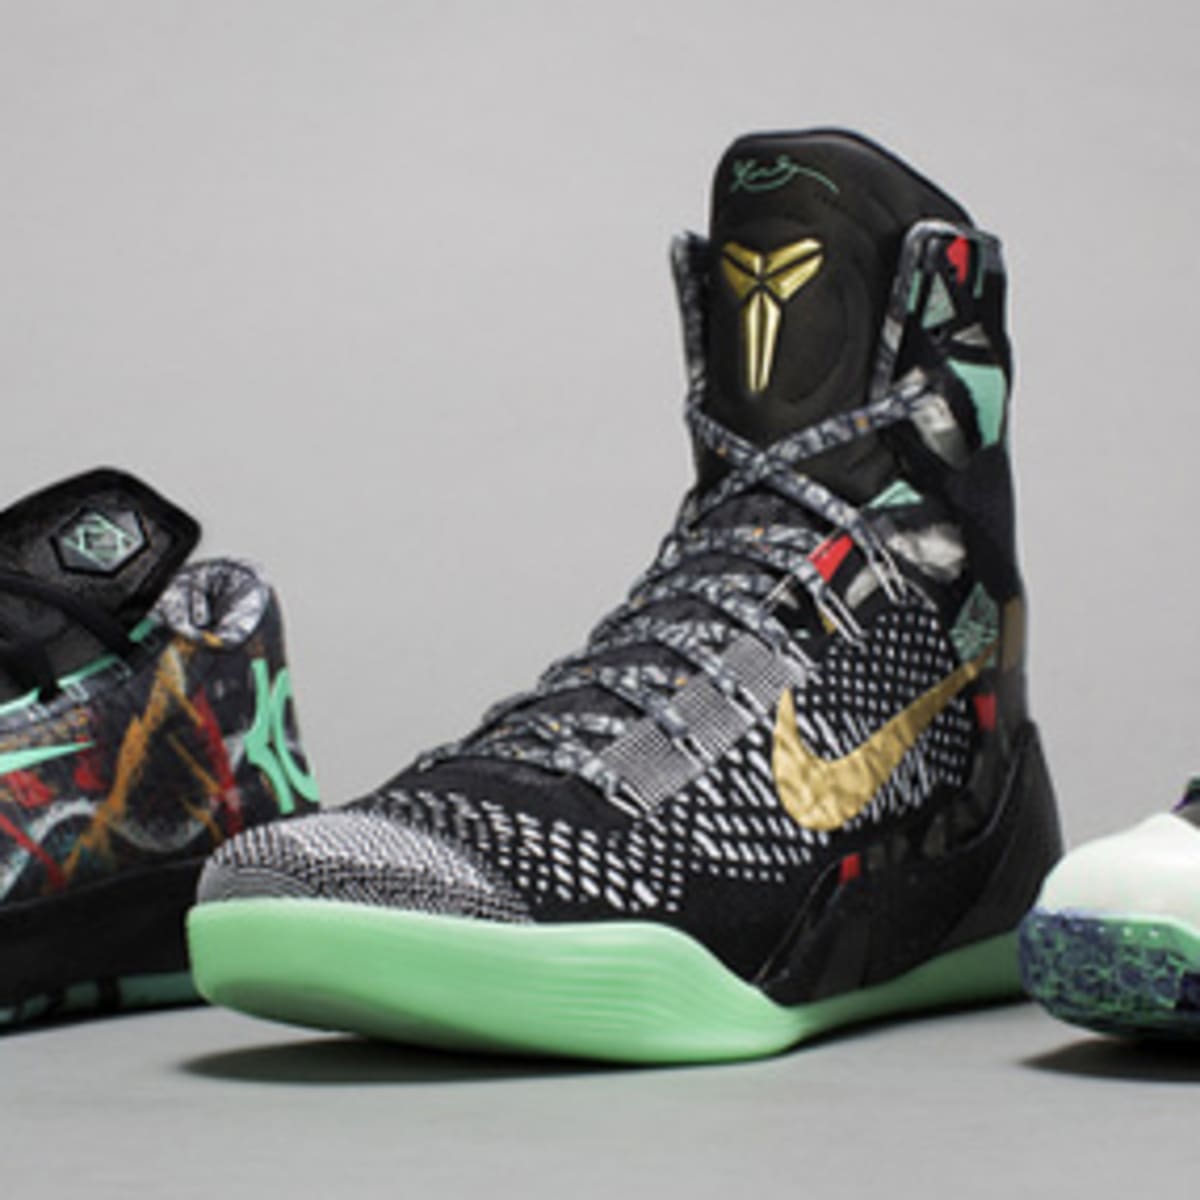 lebron all star shoes